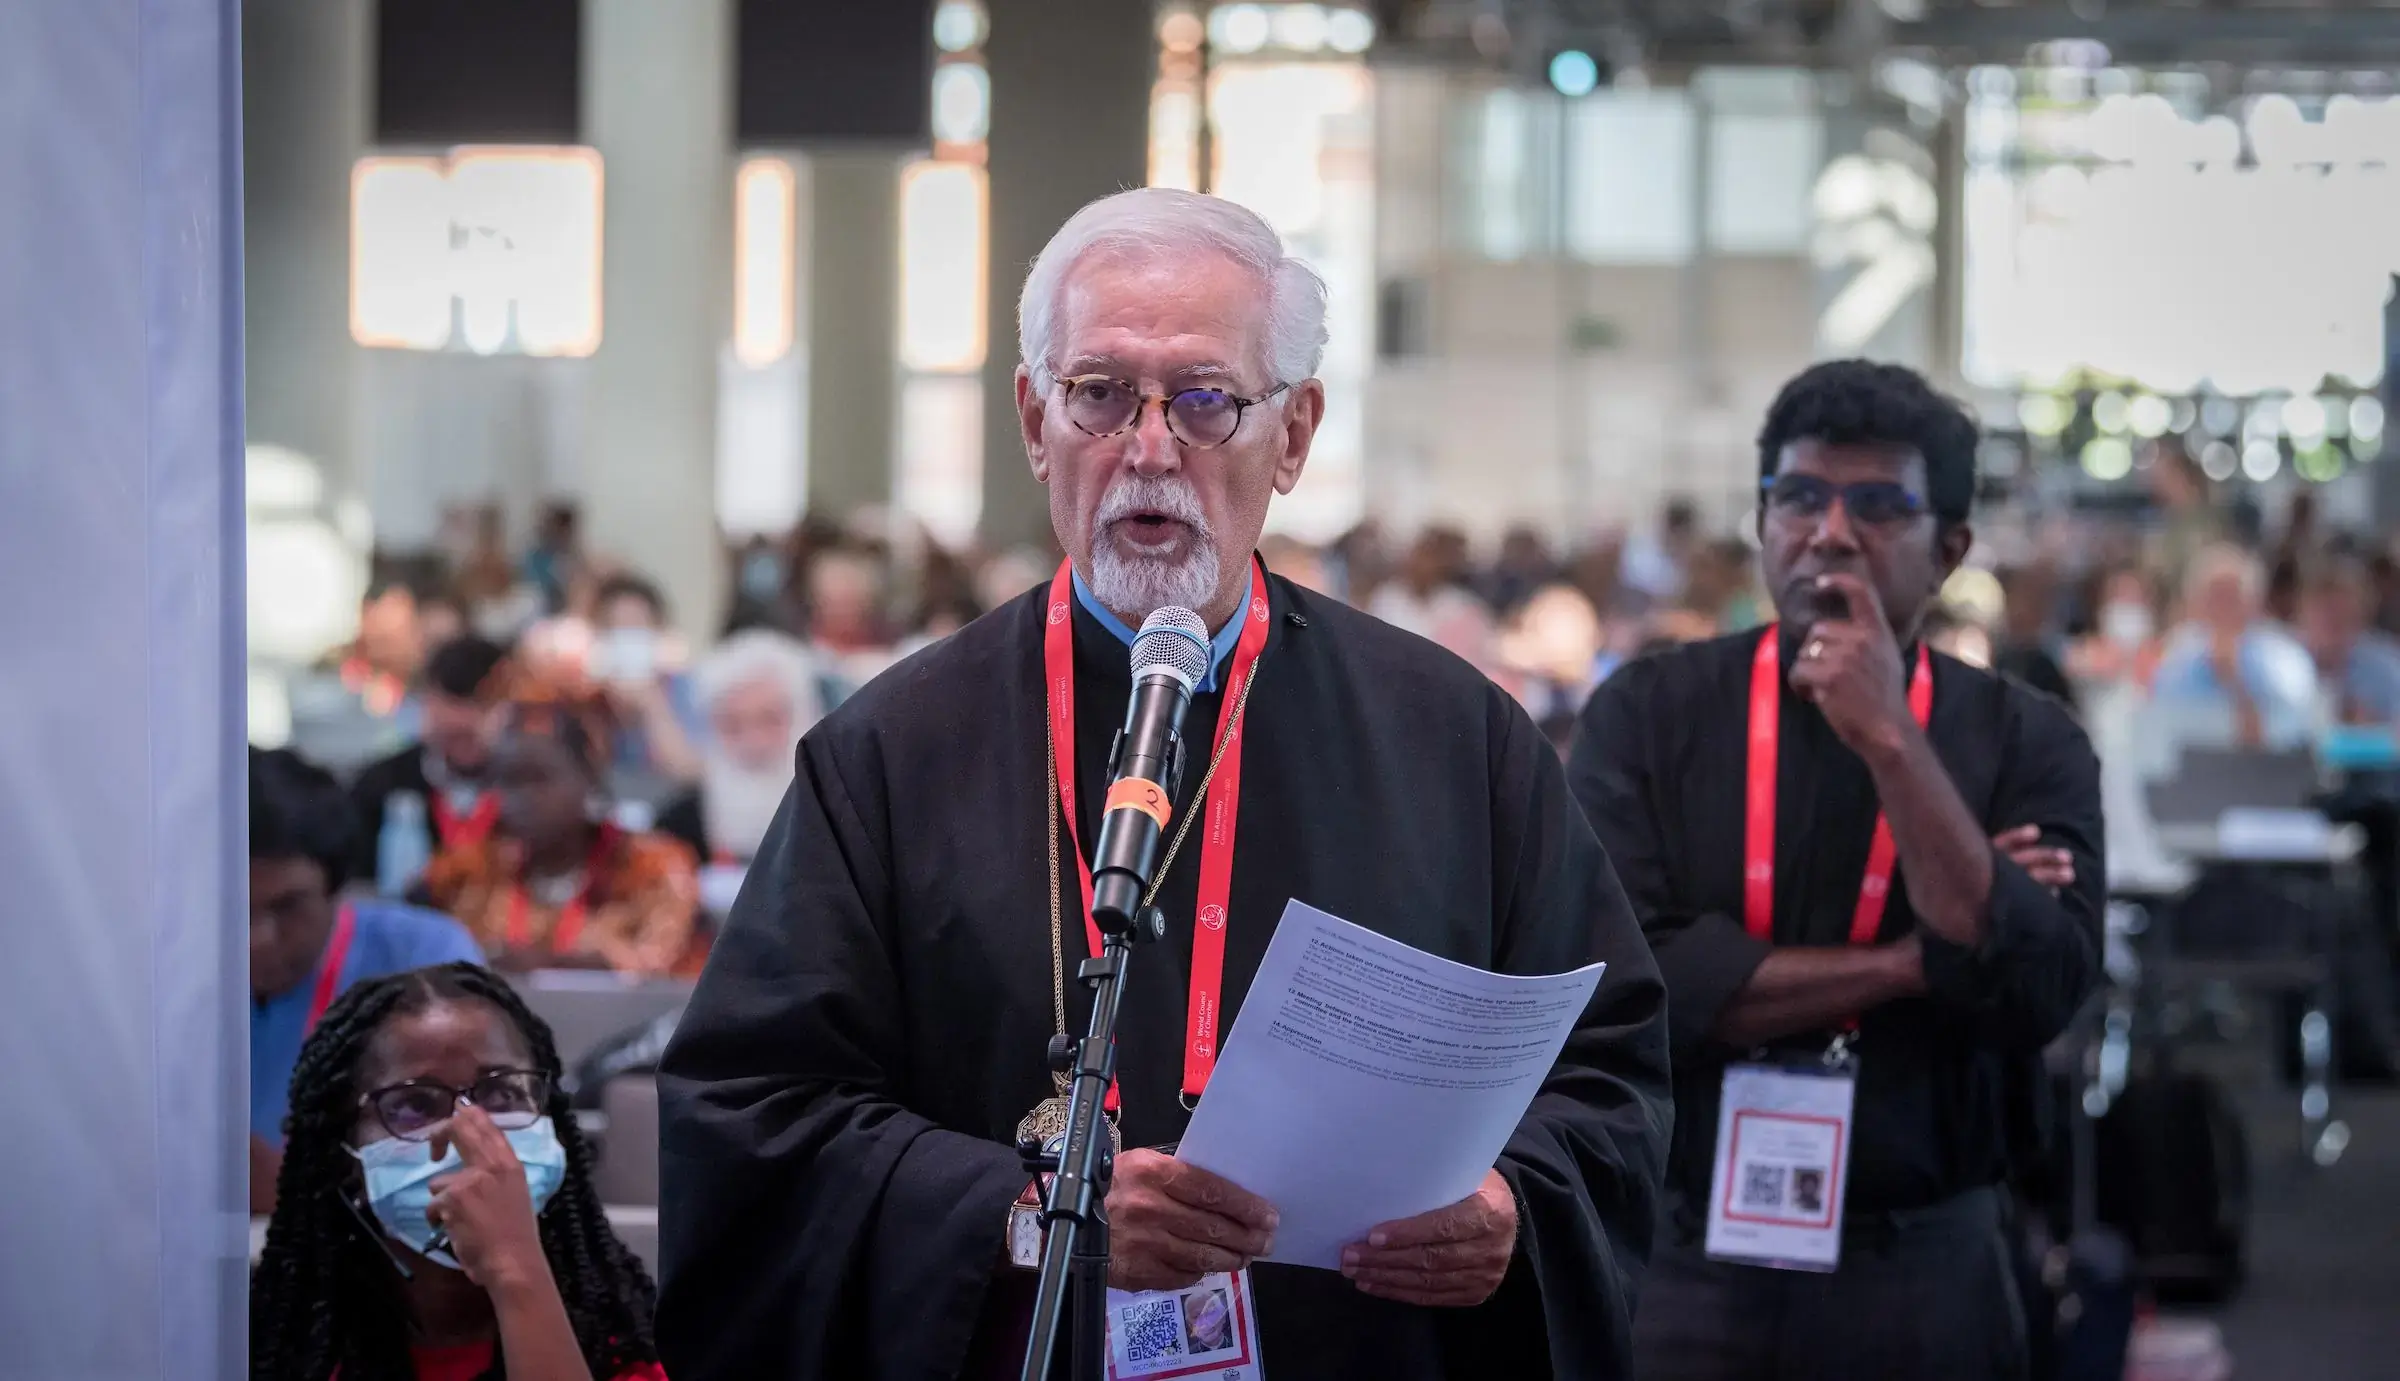 Archbishop Dr Vicken Aykazian, Armenian Apostolic Church, Mother See of Holy Etchmiadzin, elected as one of two vice moderators of the WCC central committee